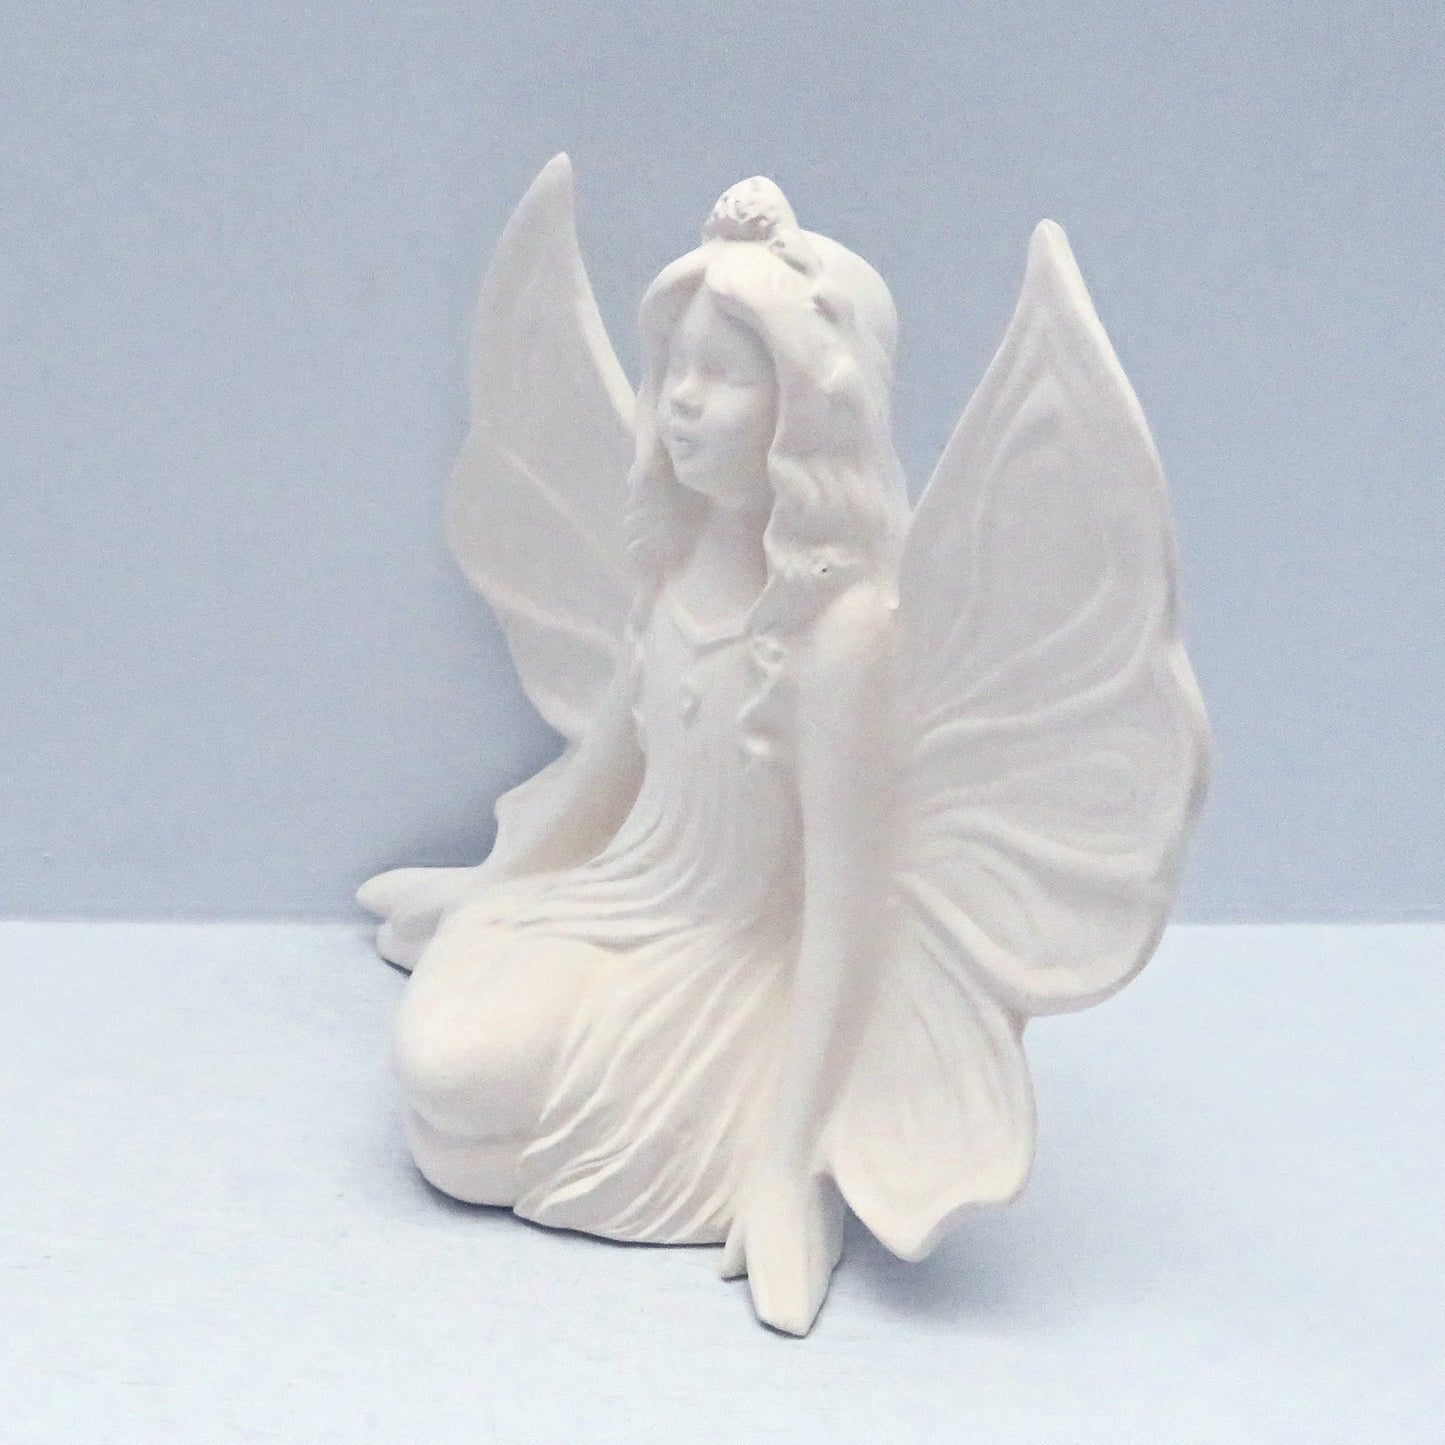 Side viwe of fairy statue, facing left, against a pale blue surface